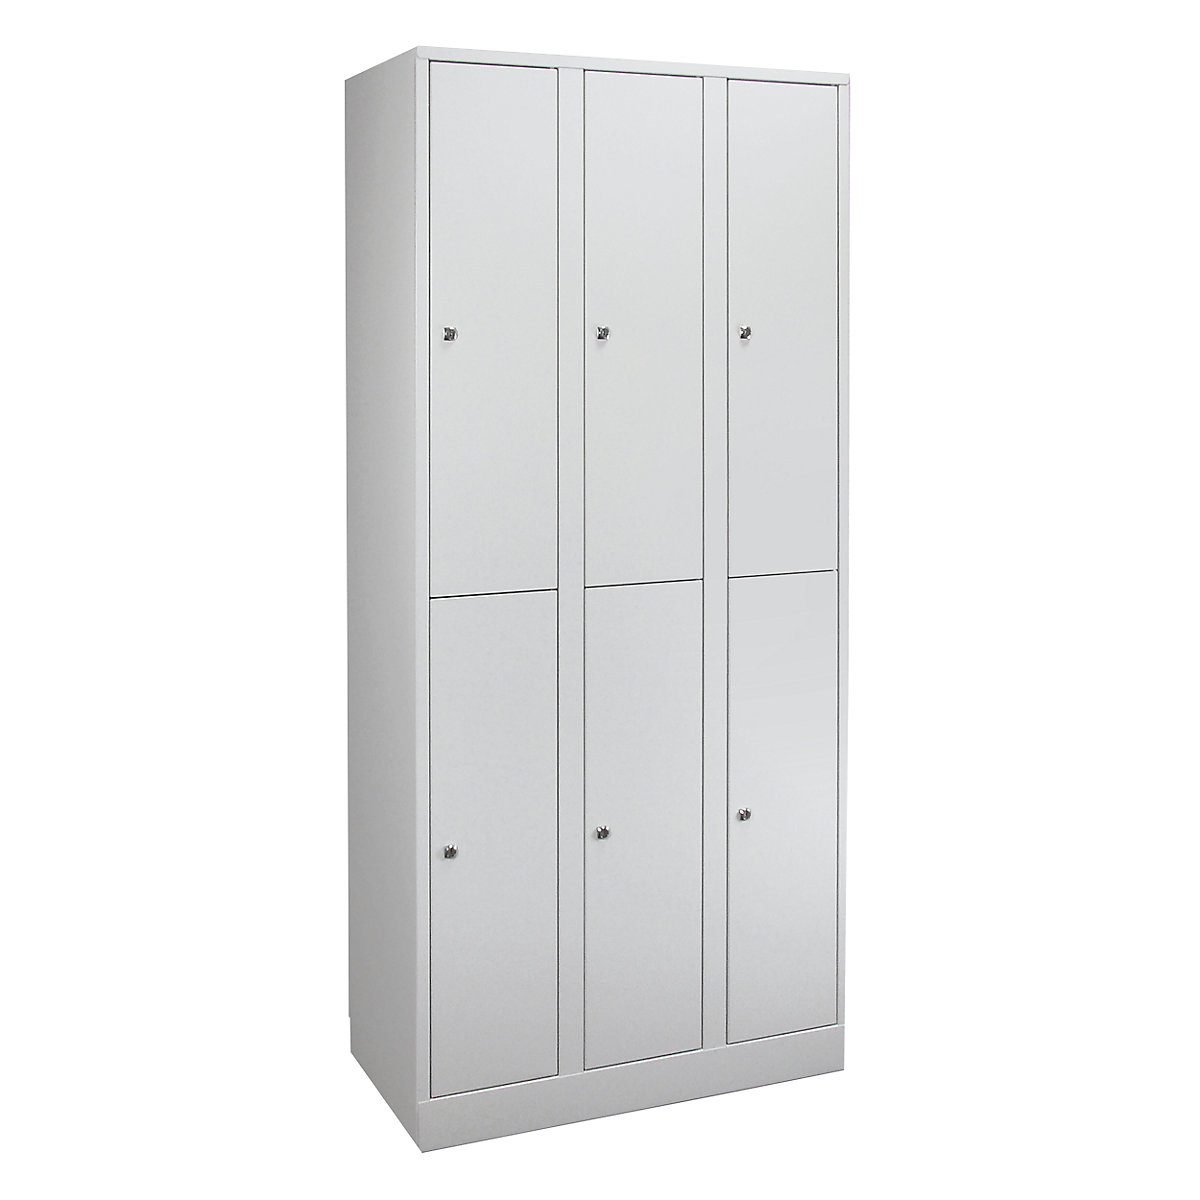 Wardrobe in practical sizes – Wolf, 6 compartments, compartment width 400 mm, light grey / light grey-3